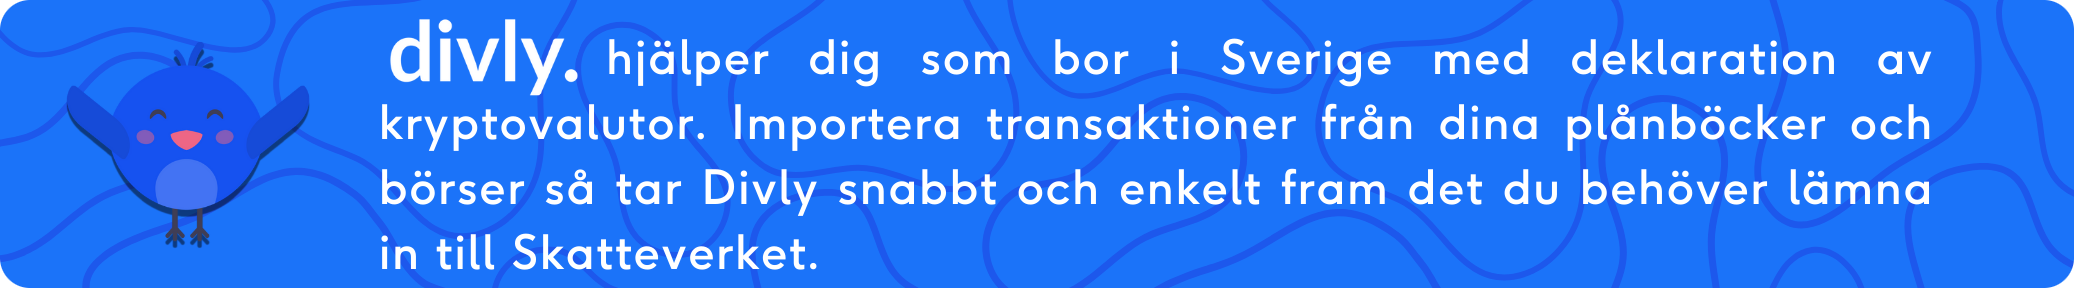 divly automates taxes in Sweden